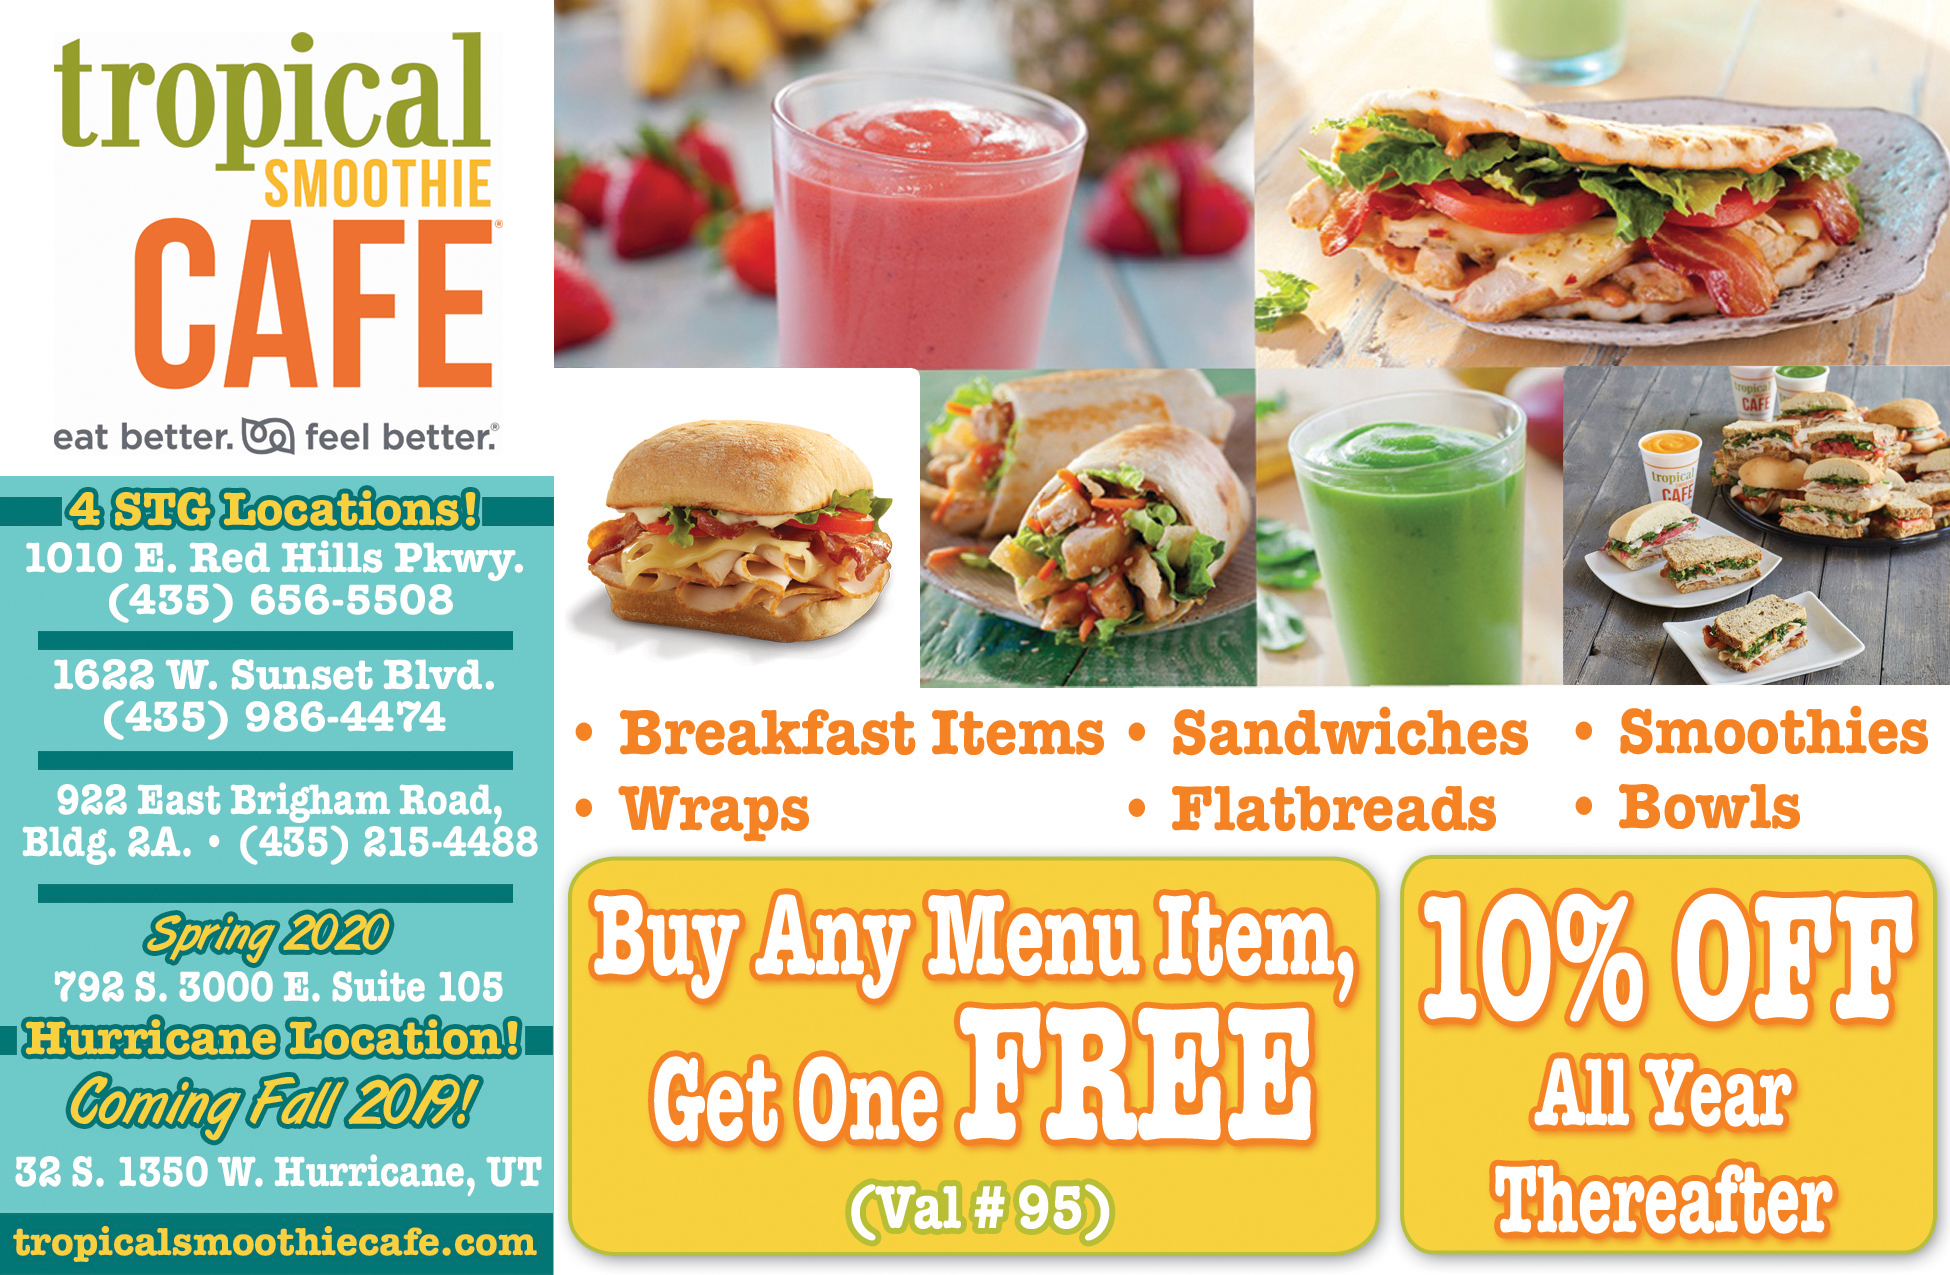 Tropical Smoothie Cafe - smoothies, sandwiches